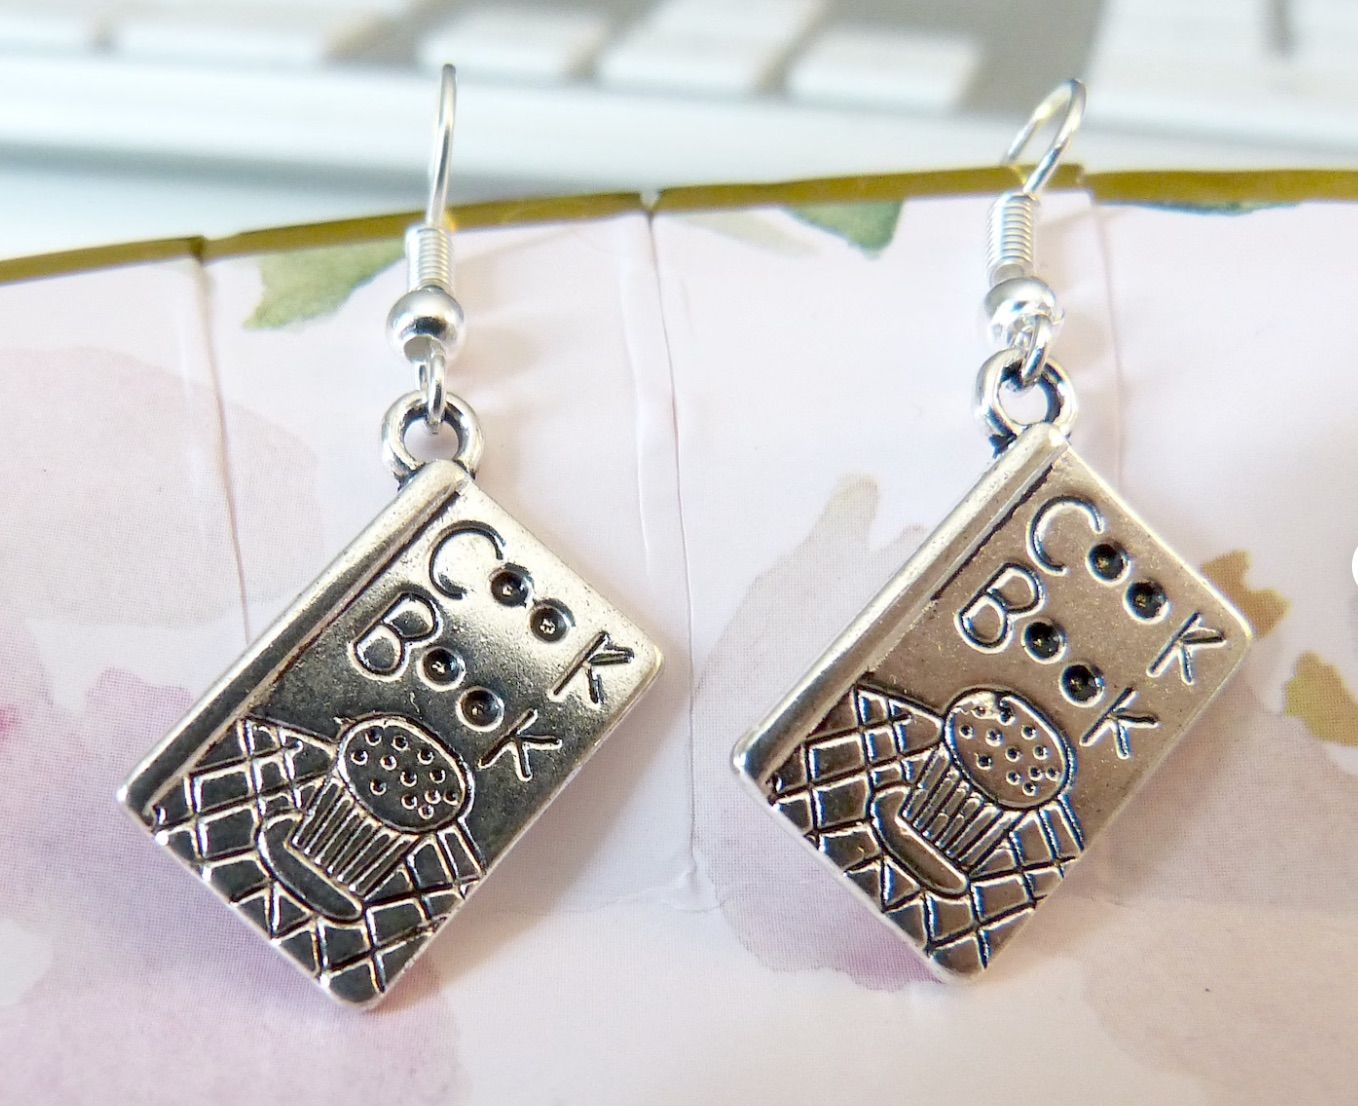 Silver earrings with cookbook charms.